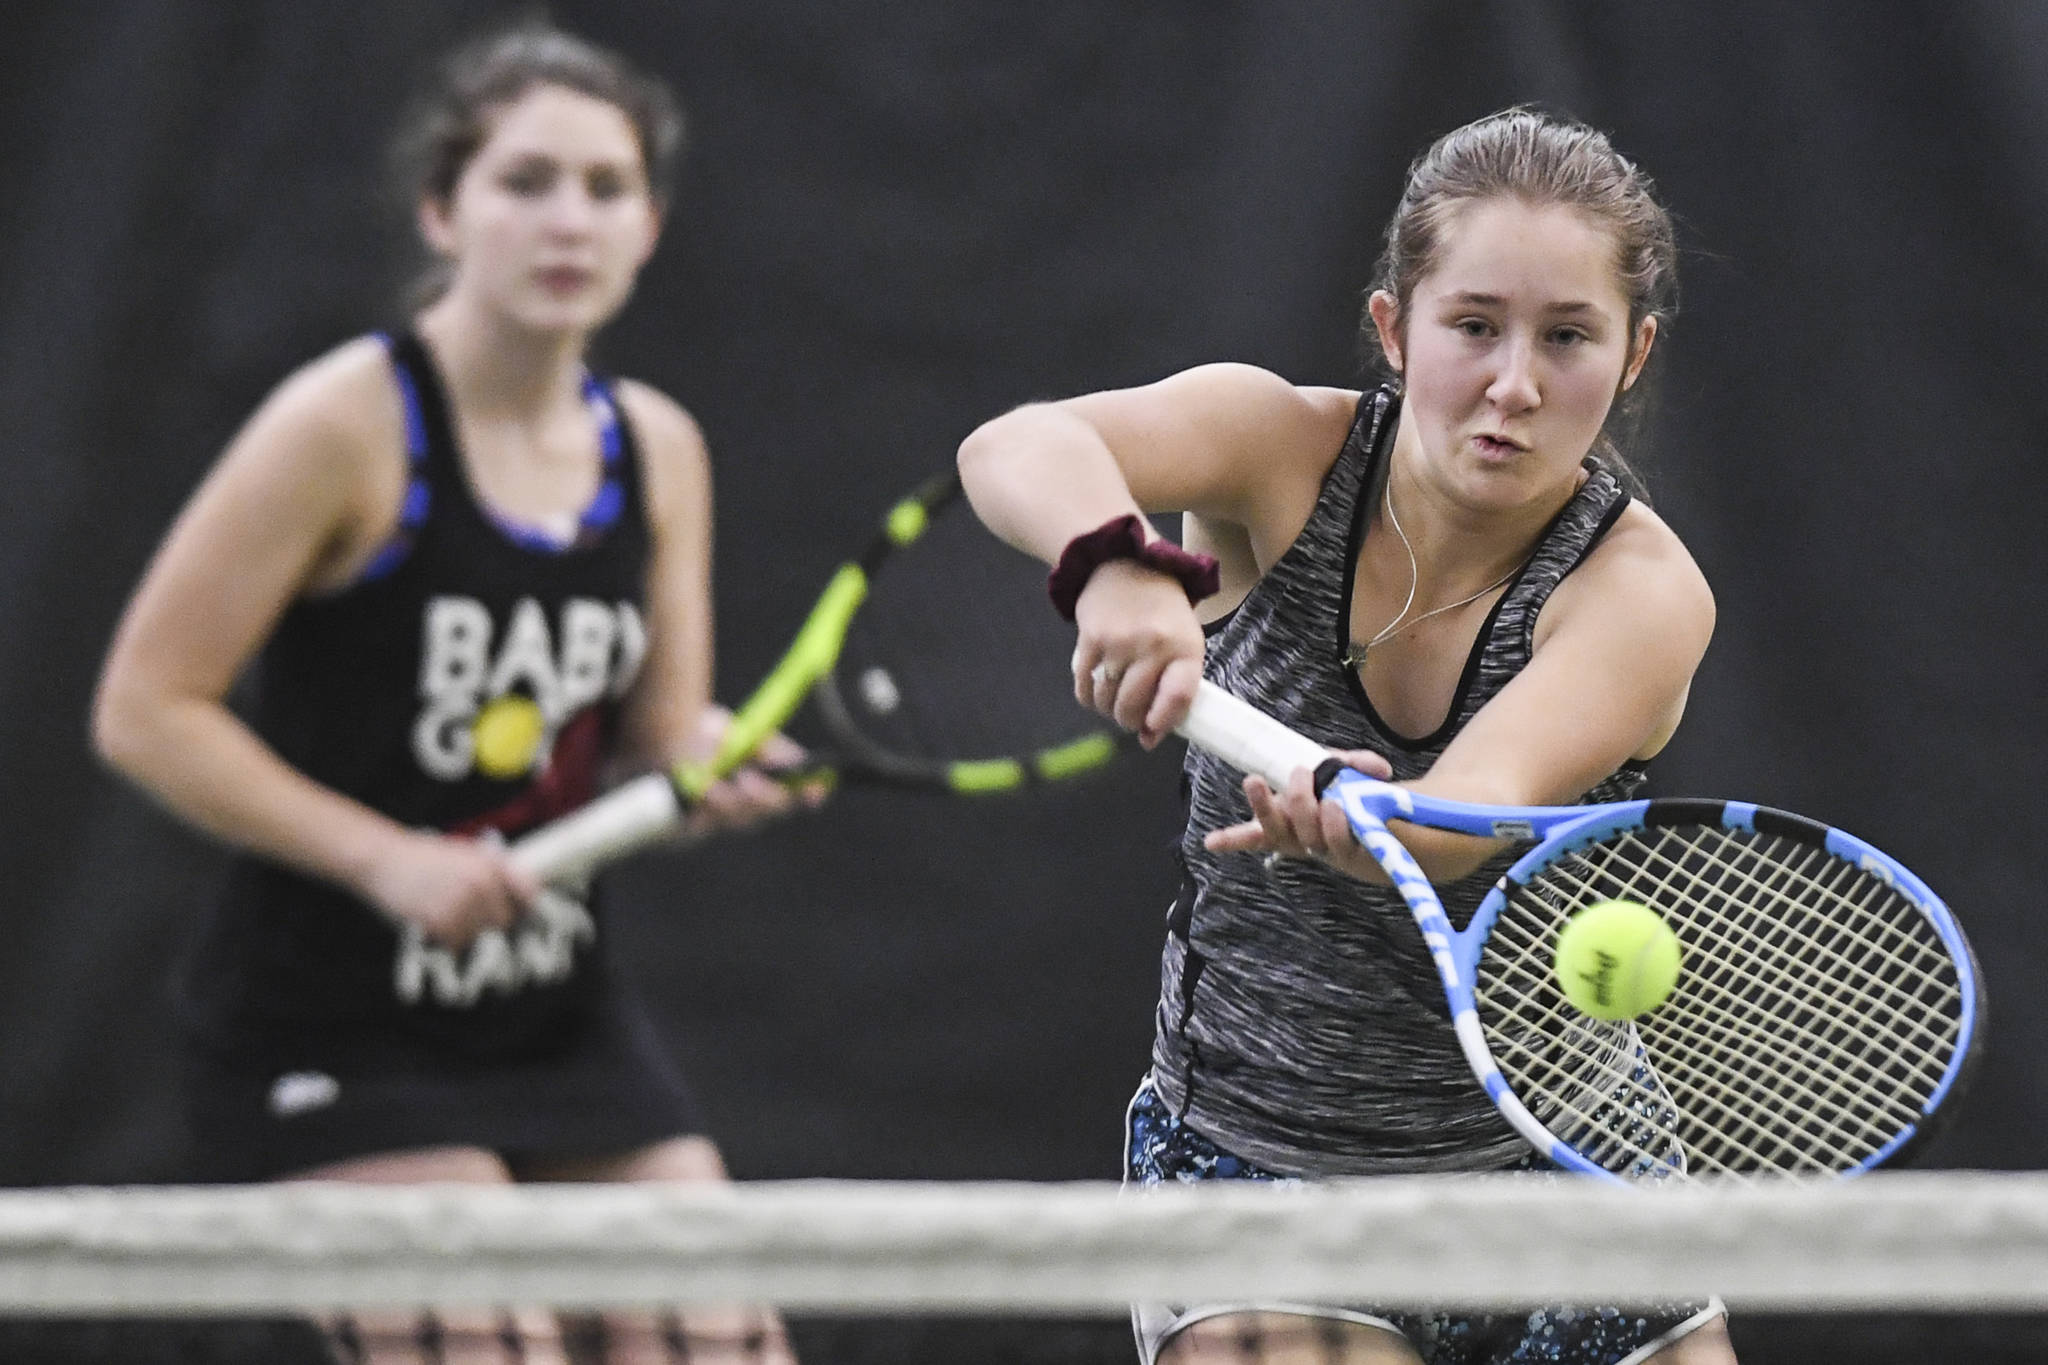 Adelie McMillan, right, hits a volley as she plays in the girls doubles’ final with partner Olivia Moore against Jaymie Collman and Katie Pikul during the Region V Tennis Tournament at The Alaska Club/JRC on Saturday, Sept. 28, 2019. McMillan/Moore won 7-6, 6-4. (Michael Penn | Juneau Empire)